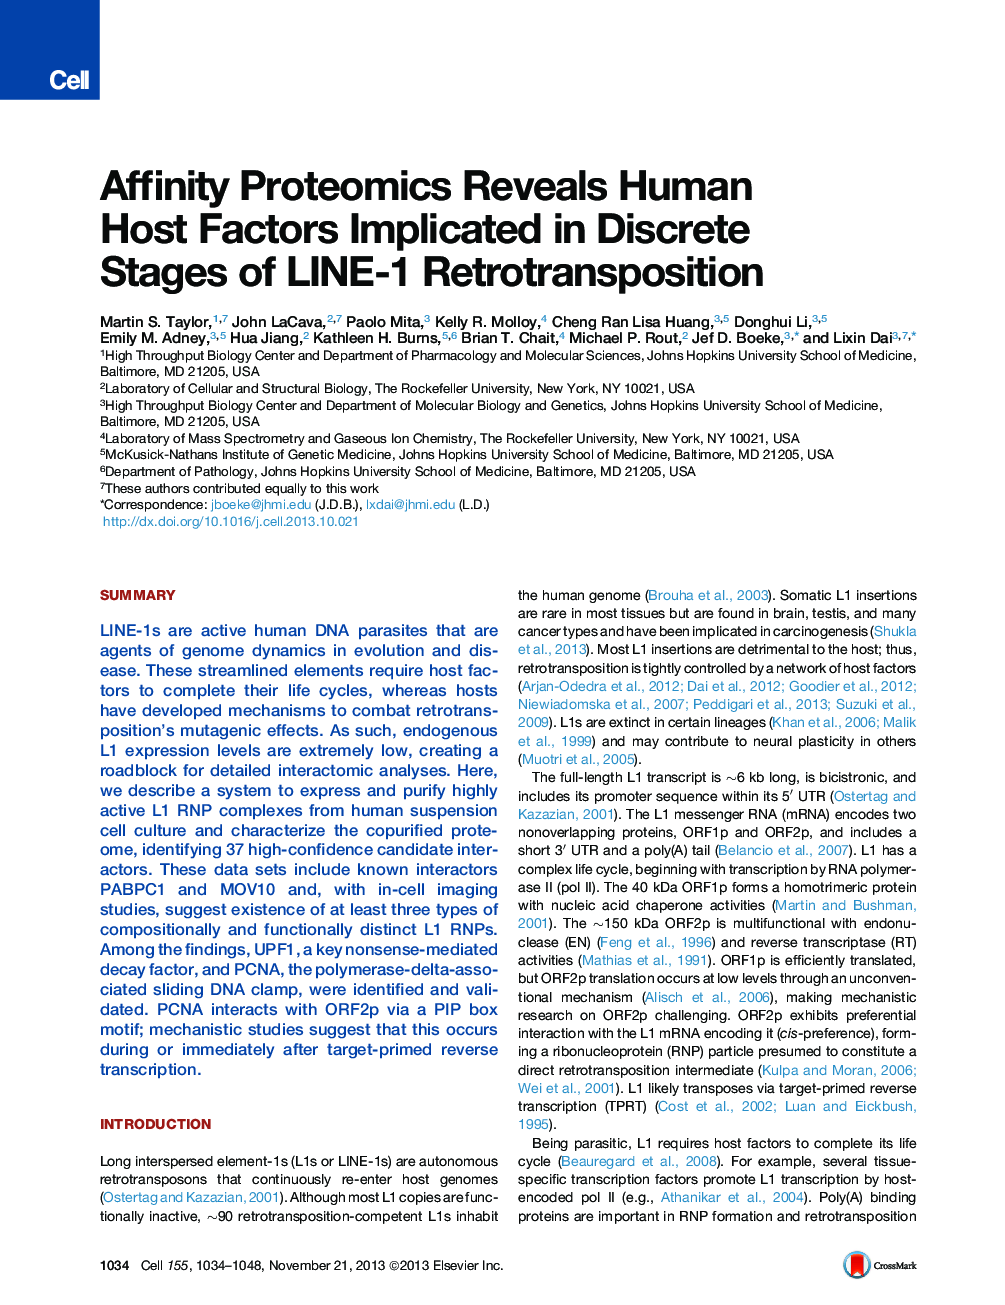 Affinity Proteomics Reveals Human Host Factors Implicated in Discrete Stages of LINE-1 Retrotransposition